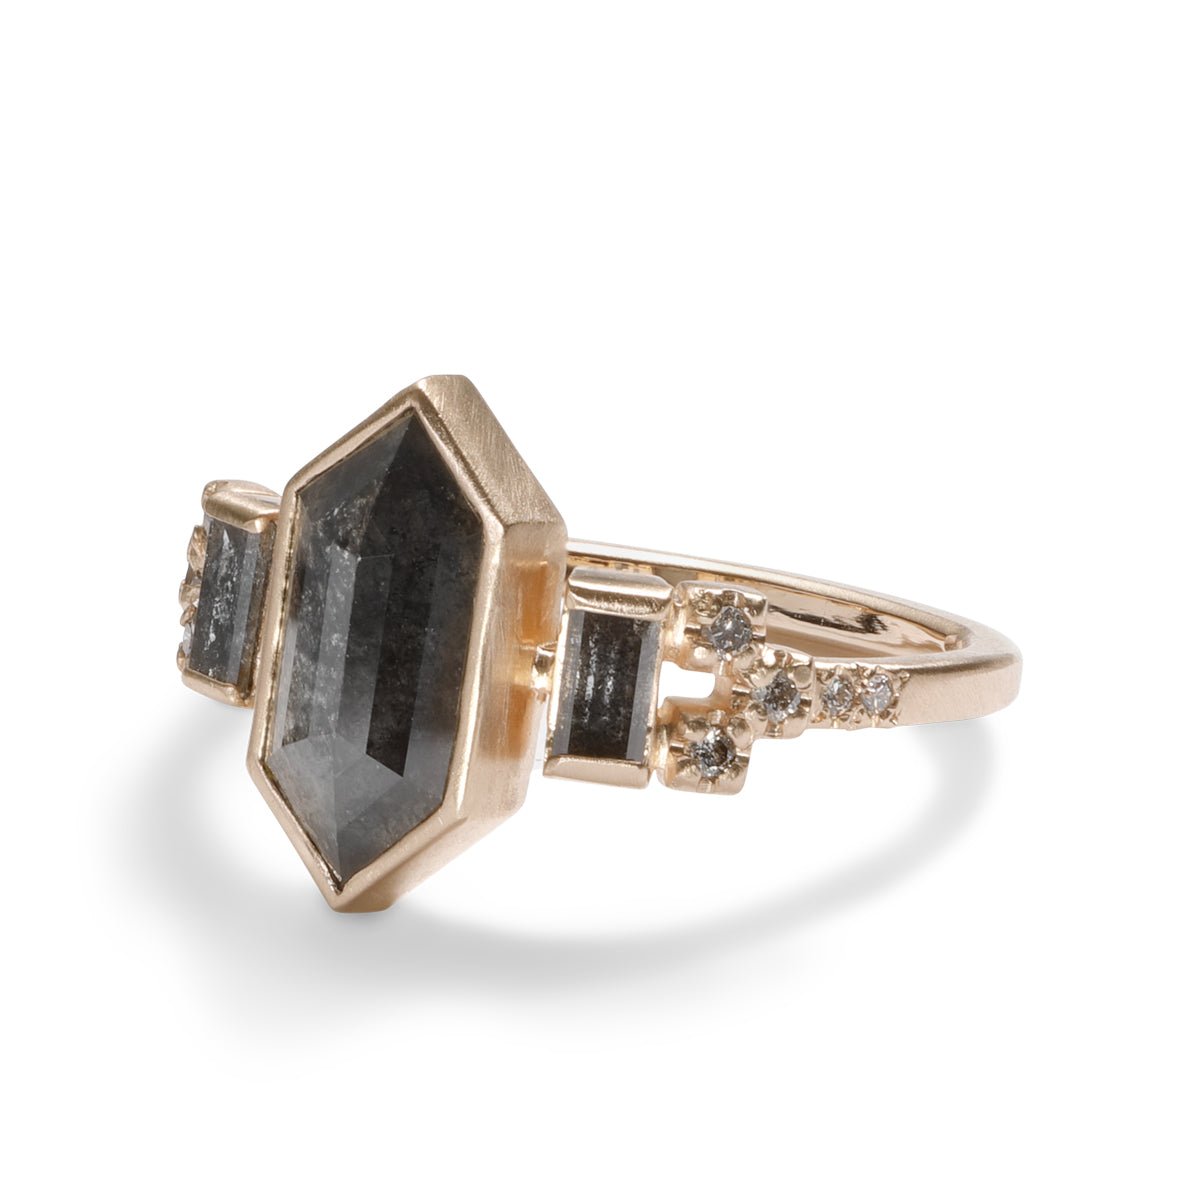 Hexagonal Libero ring. Features conflict-free salt & pepper diamonds and lab-grown white diamonds set in 14K gold.